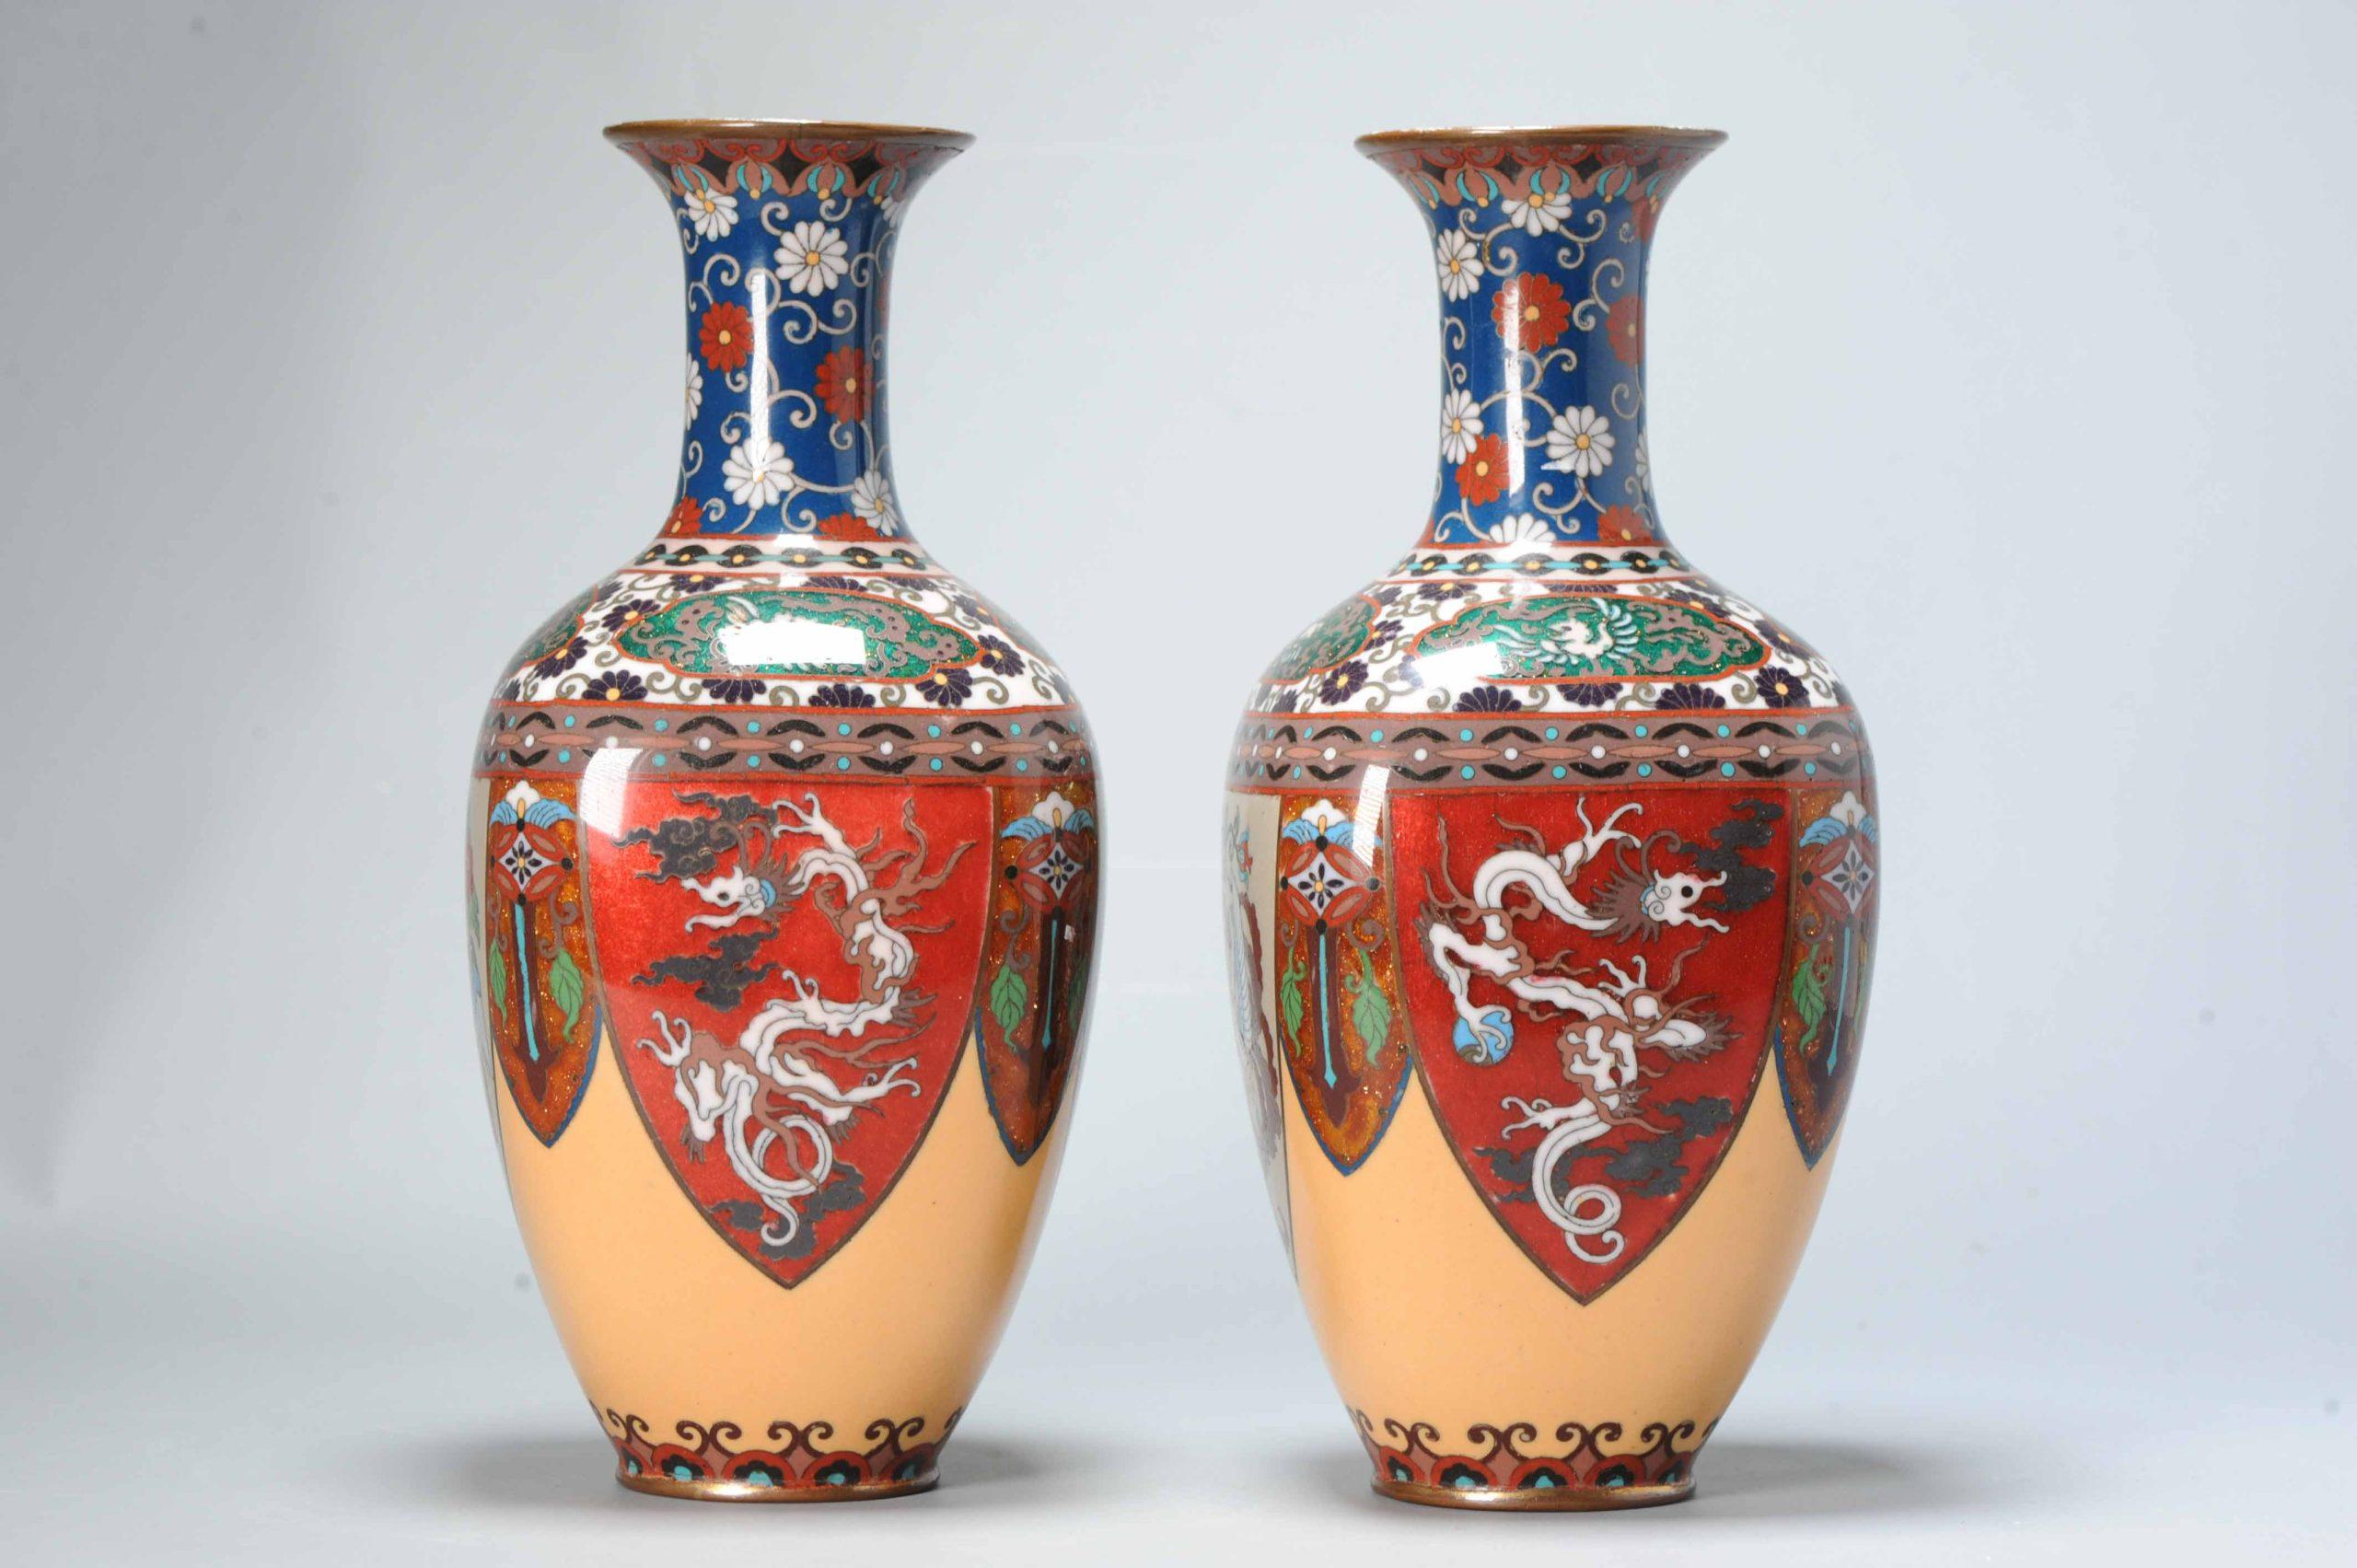 Pair of Round Cloisonné Enamel Vases Meiji Era '1868-1912' Dragons In Good Condition For Sale In Amsterdam, Noord Holland